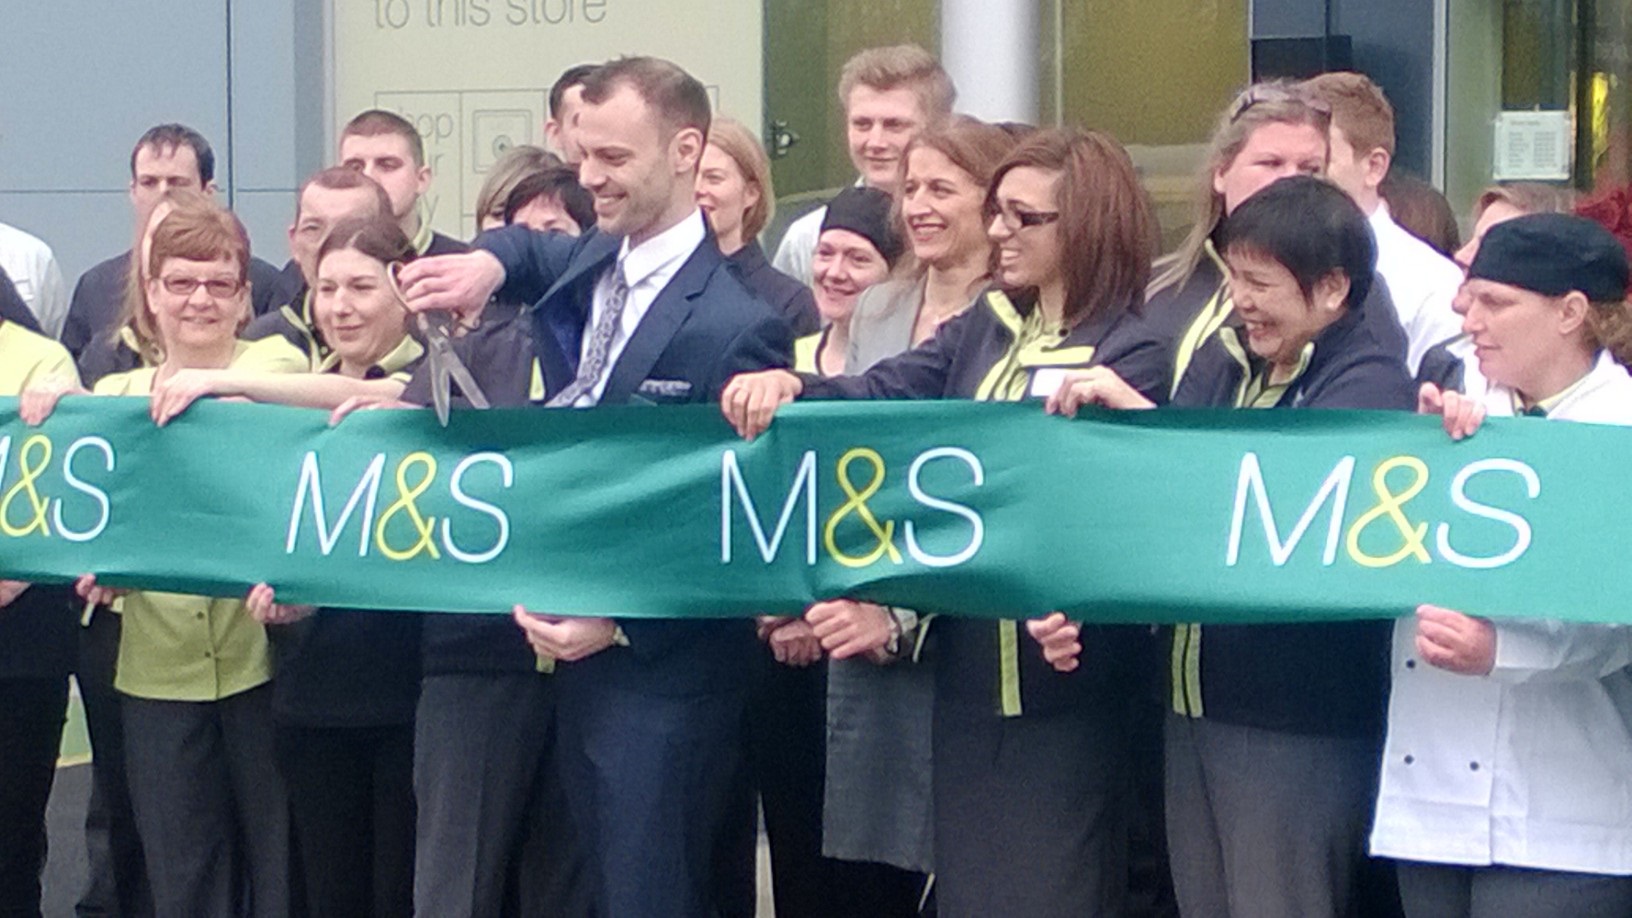 Not Just Your Average Store Opening, this is an M&S Store Opening